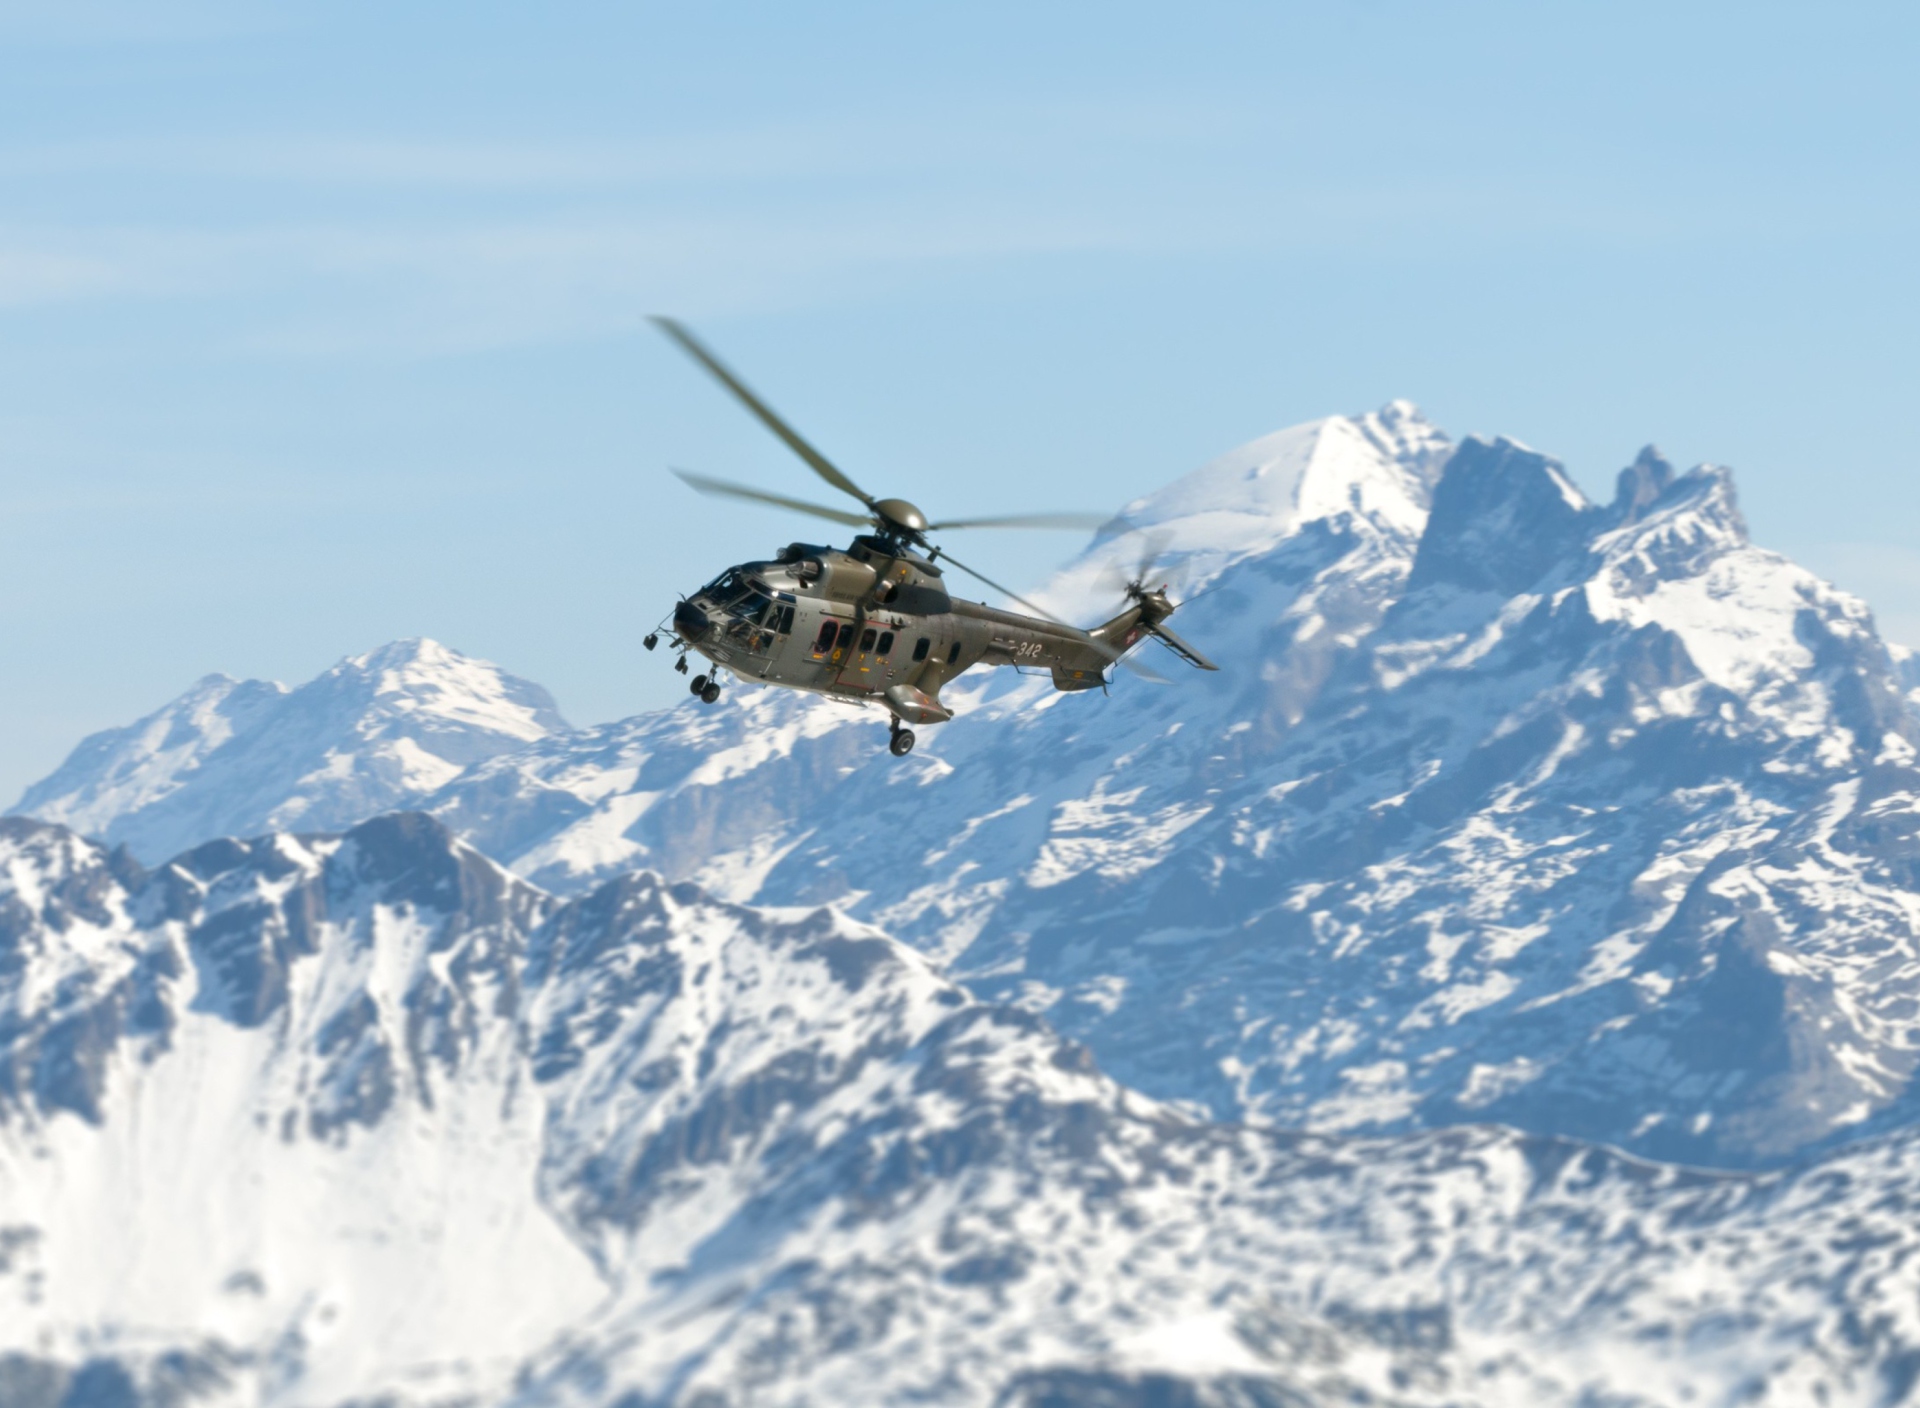 Helicopter Over Snowy Mountains wallpaper 1920x1408